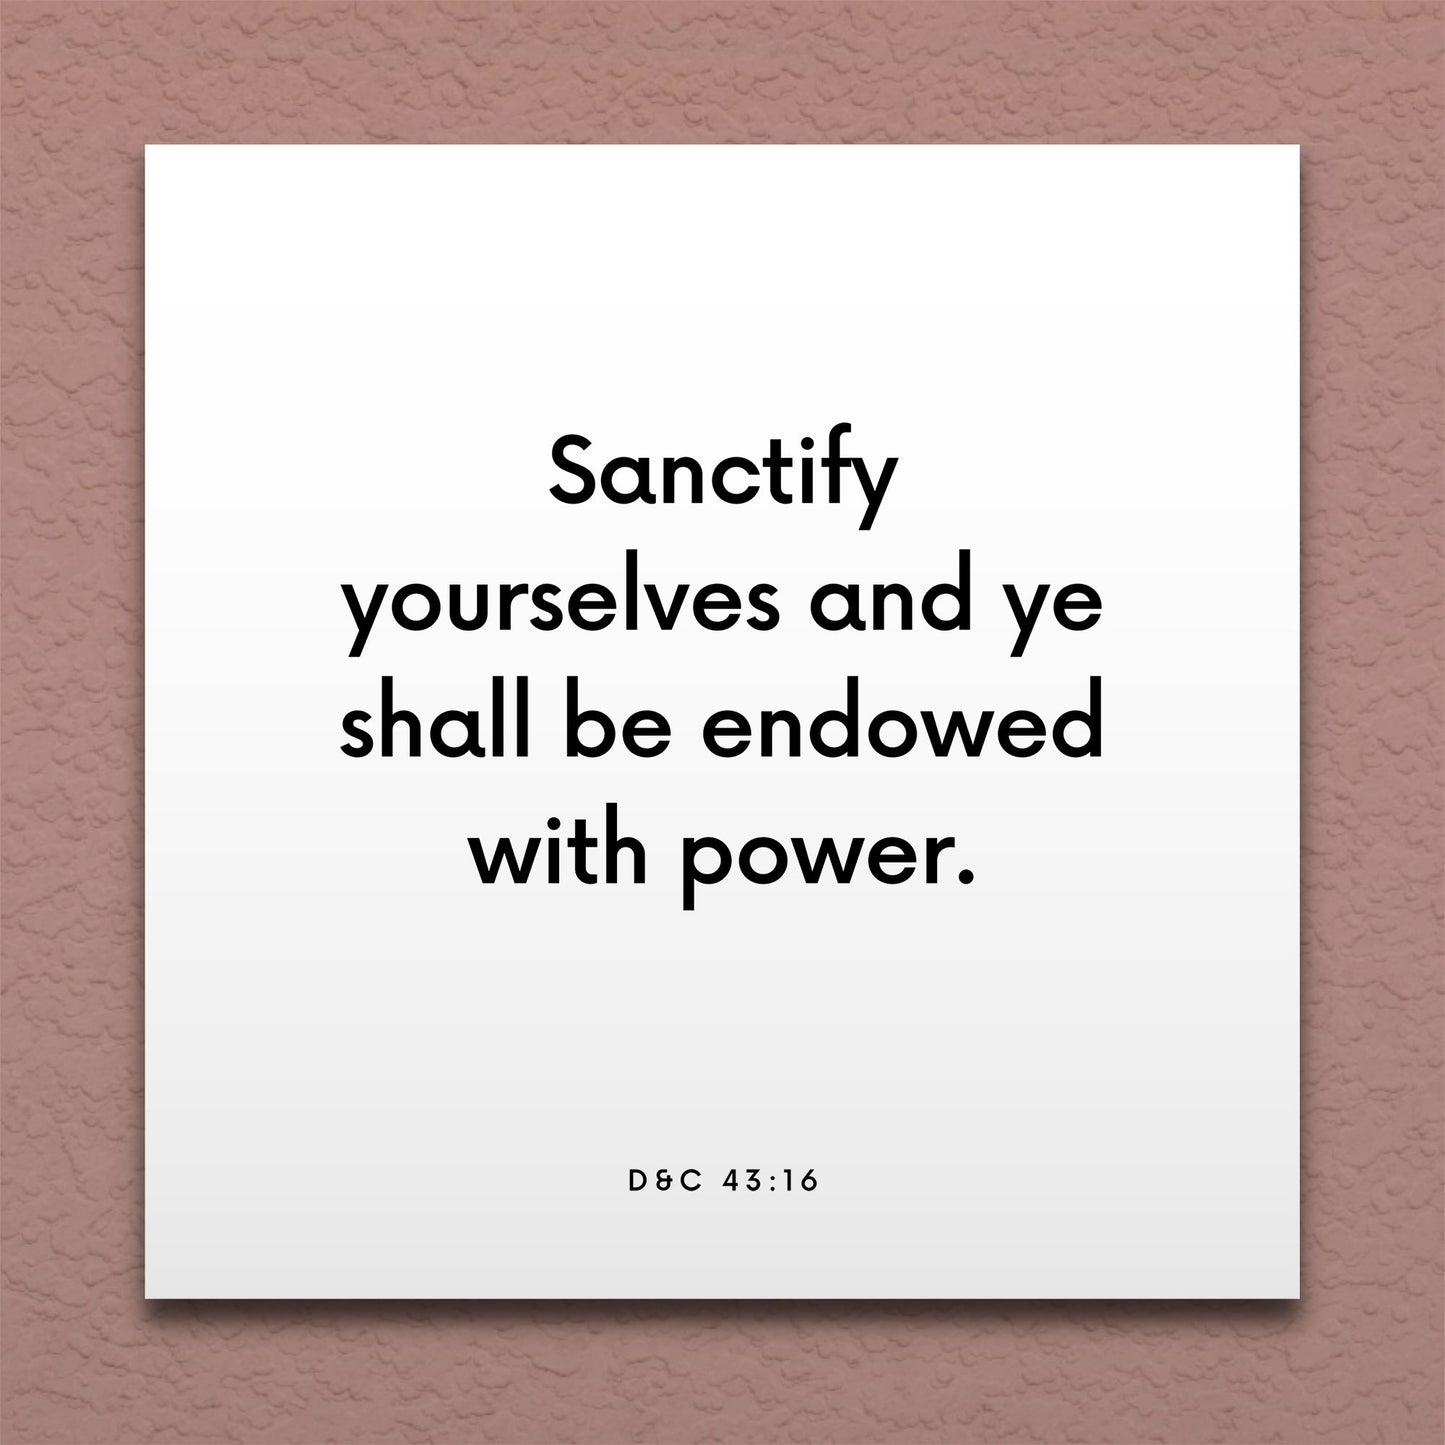 Wall-mounted scripture tile for D&C 43:16 - "Sanctify yourselves and ye shall be endowed with power"